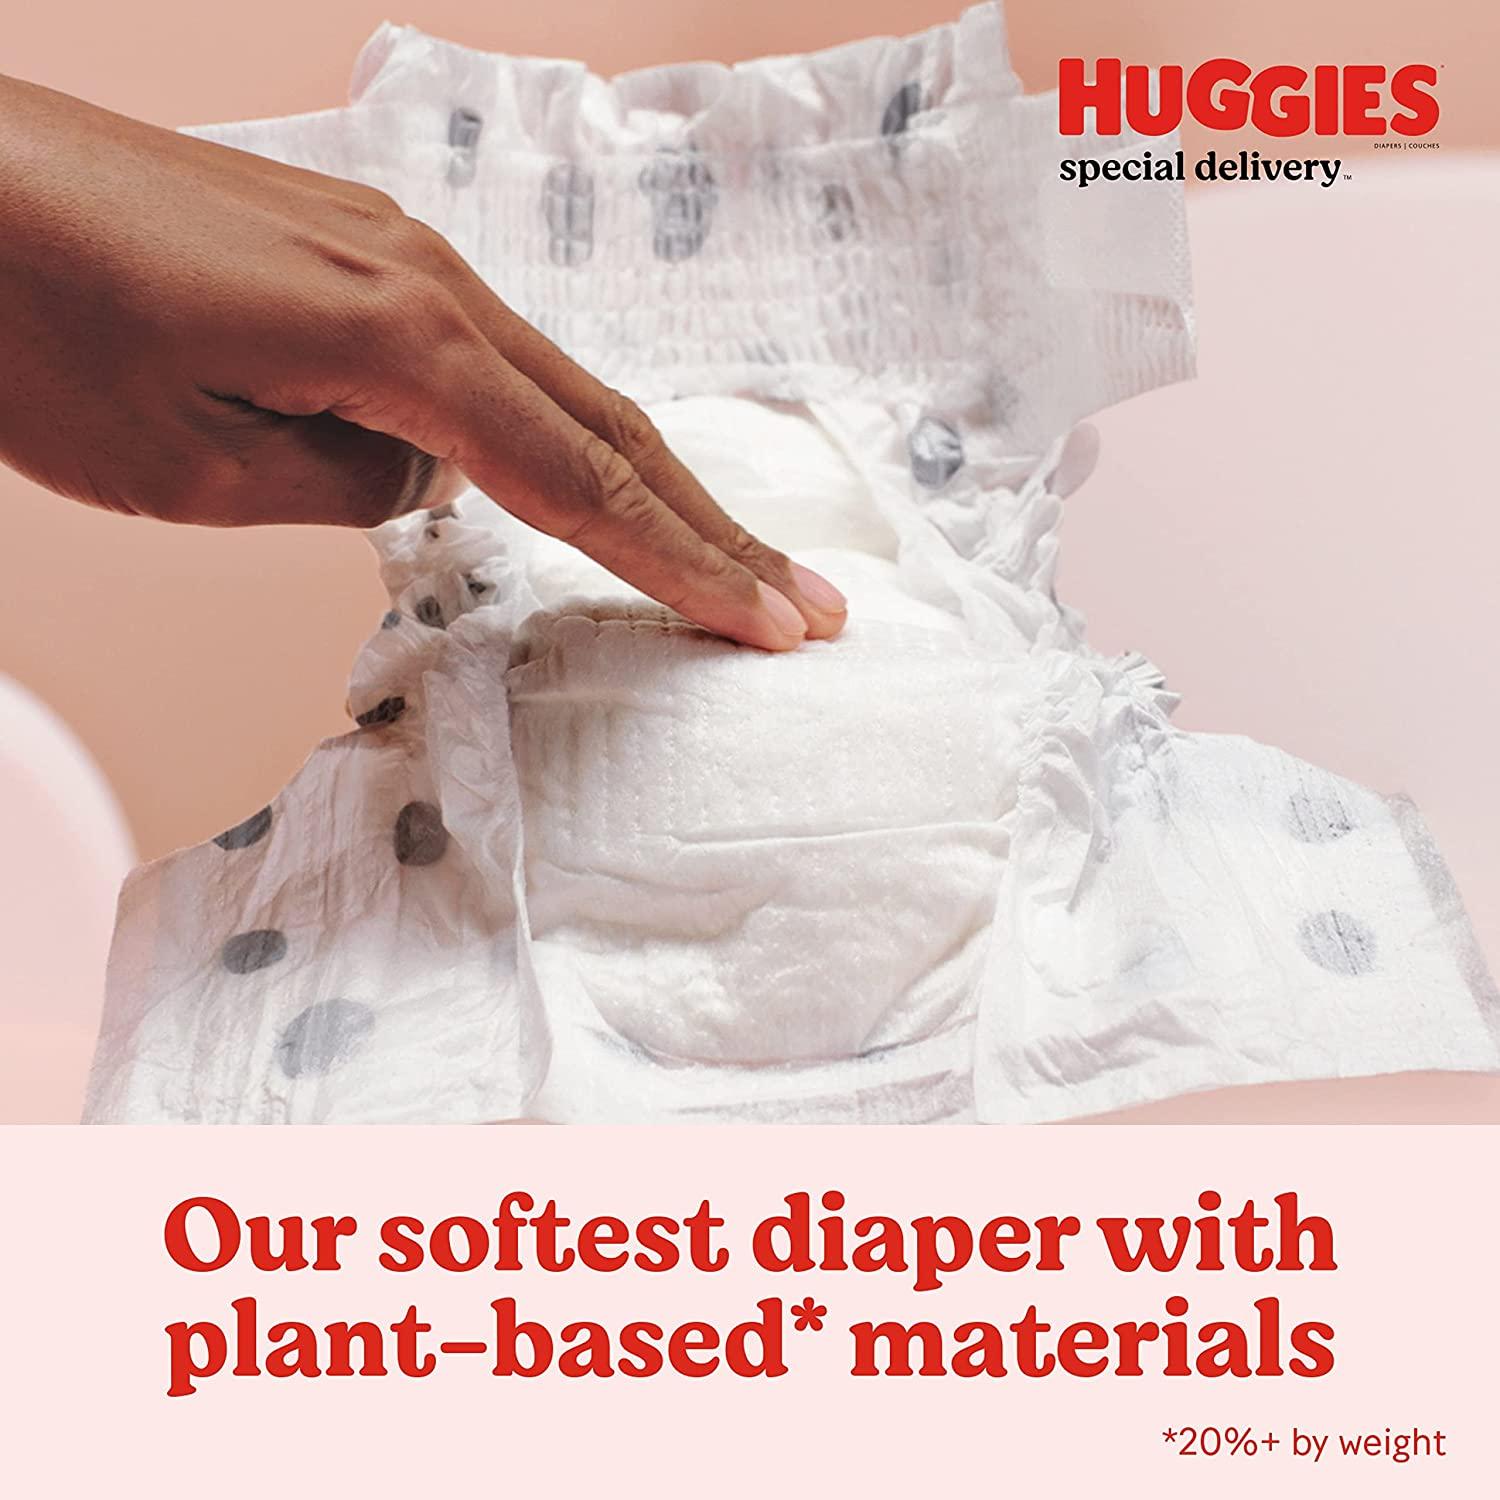 Save on Huggies Little Snugglers Size 2 Diapers 12-18 Ibs Order Online  Delivery